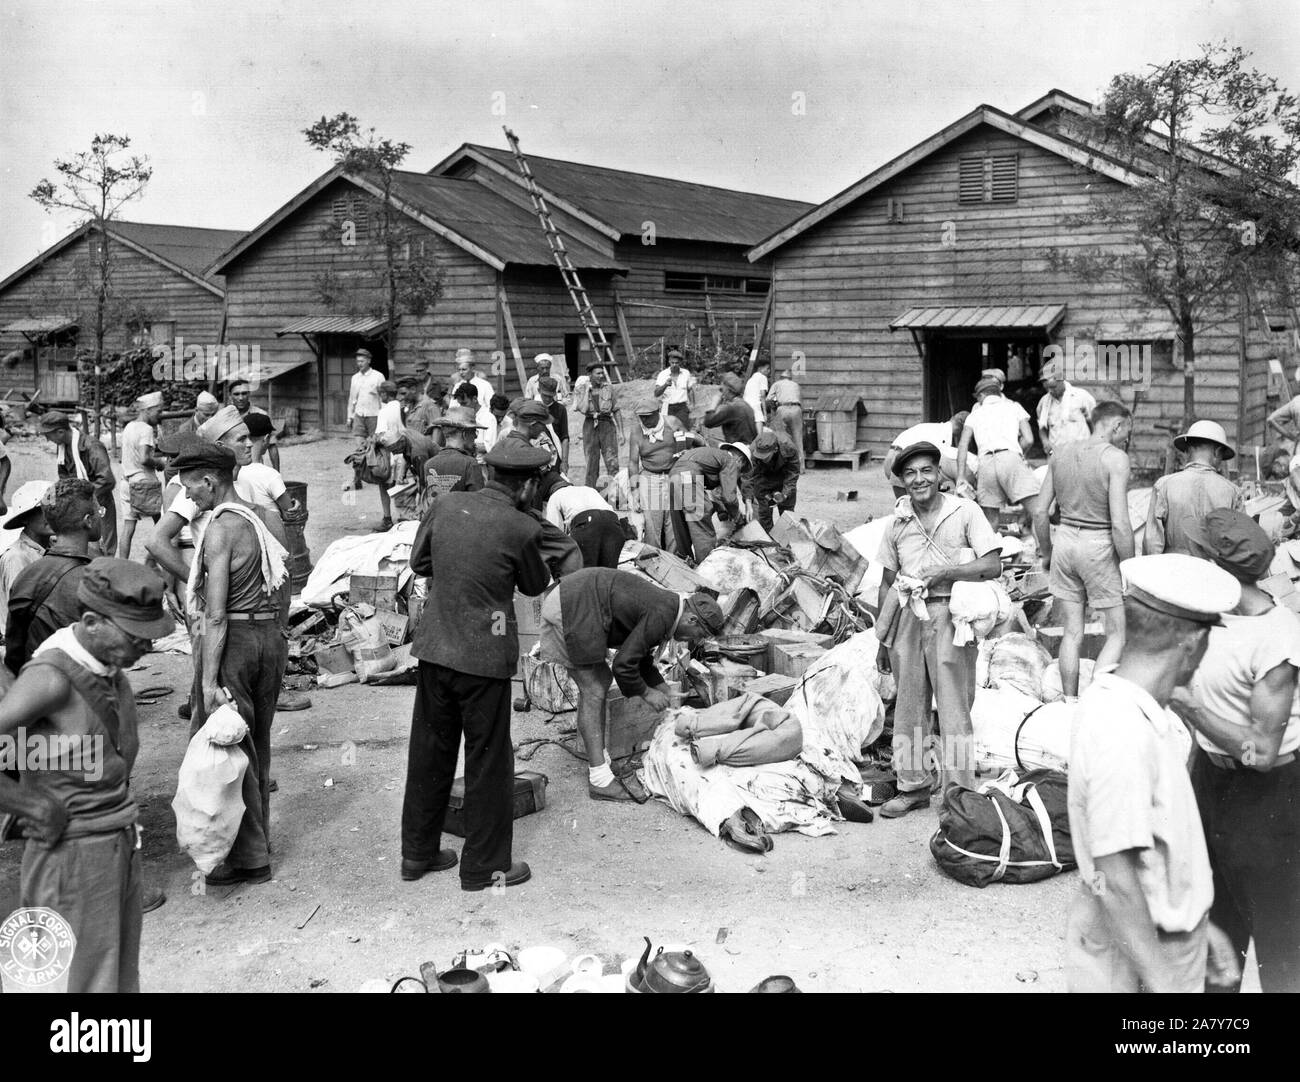 Prisoners of all nationialities of the alllied forces were interred at Omori POW camp near Tokyo. Food and clothes were air dropped to newly freed priosners. Stock Photo